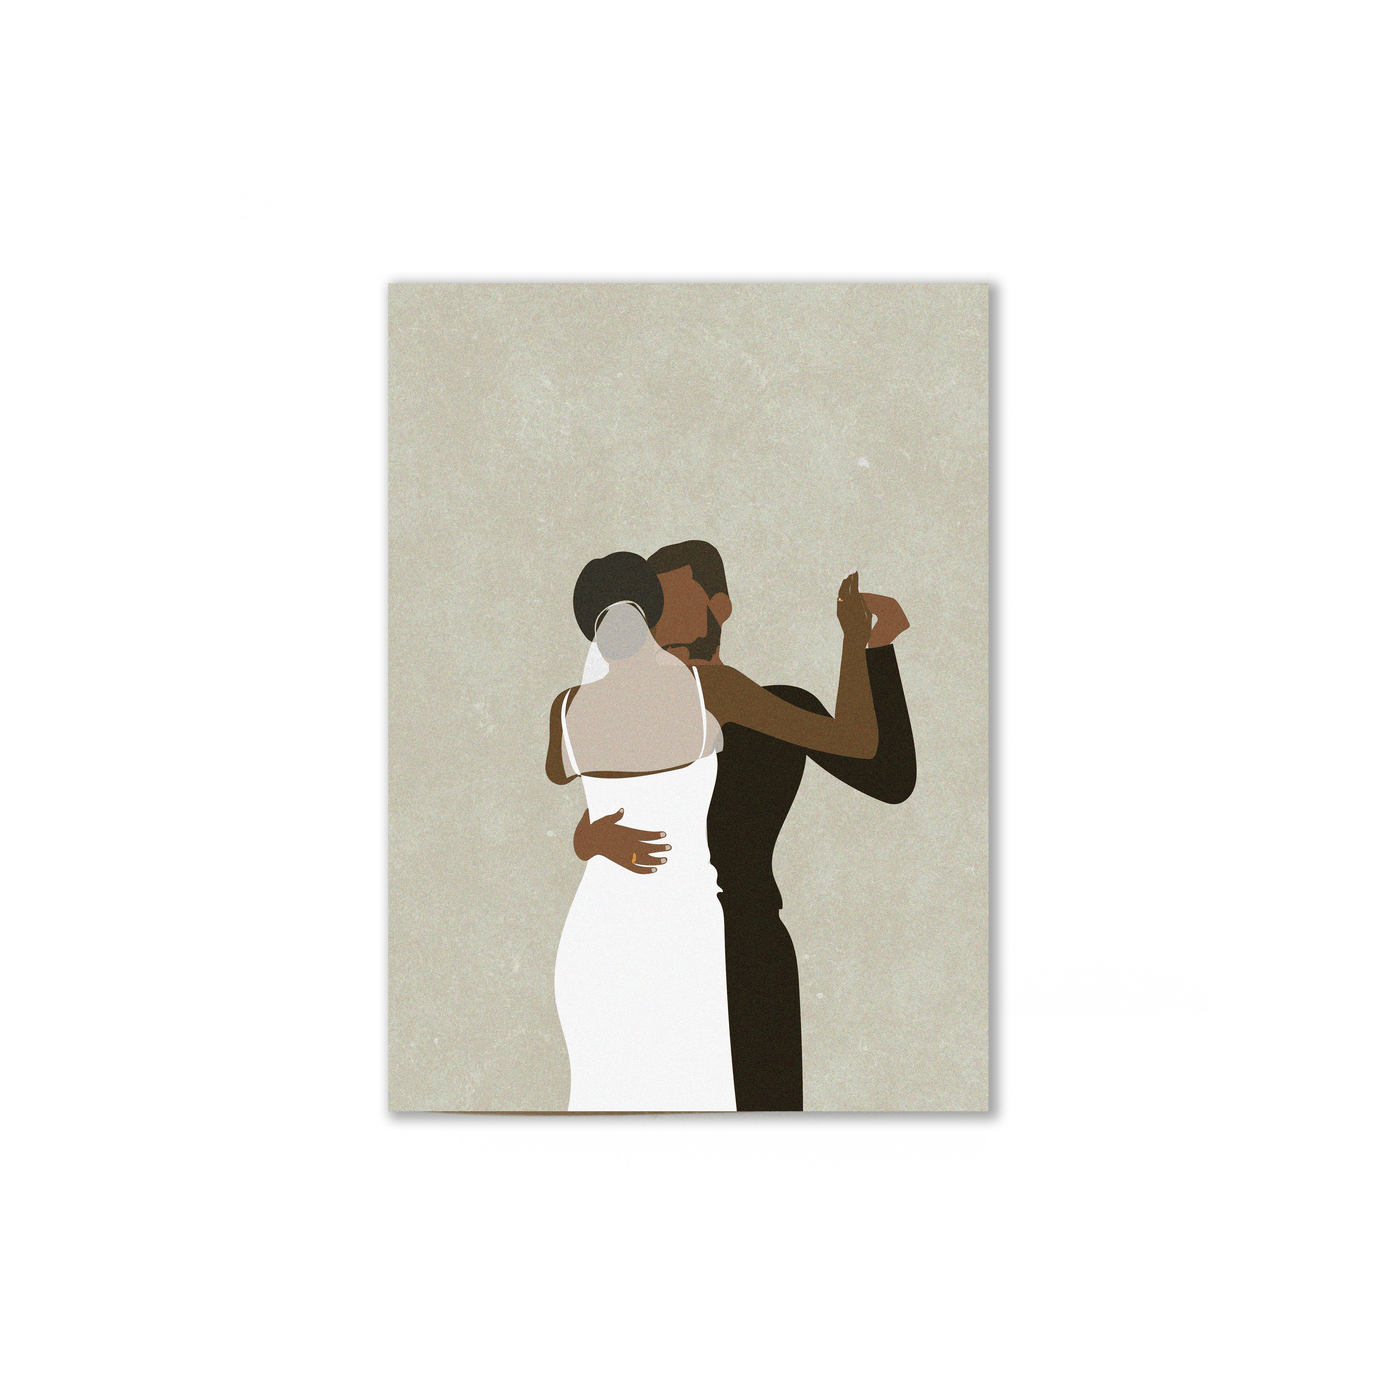 black love wedding card with black couple dancing in wedding dress and suit.